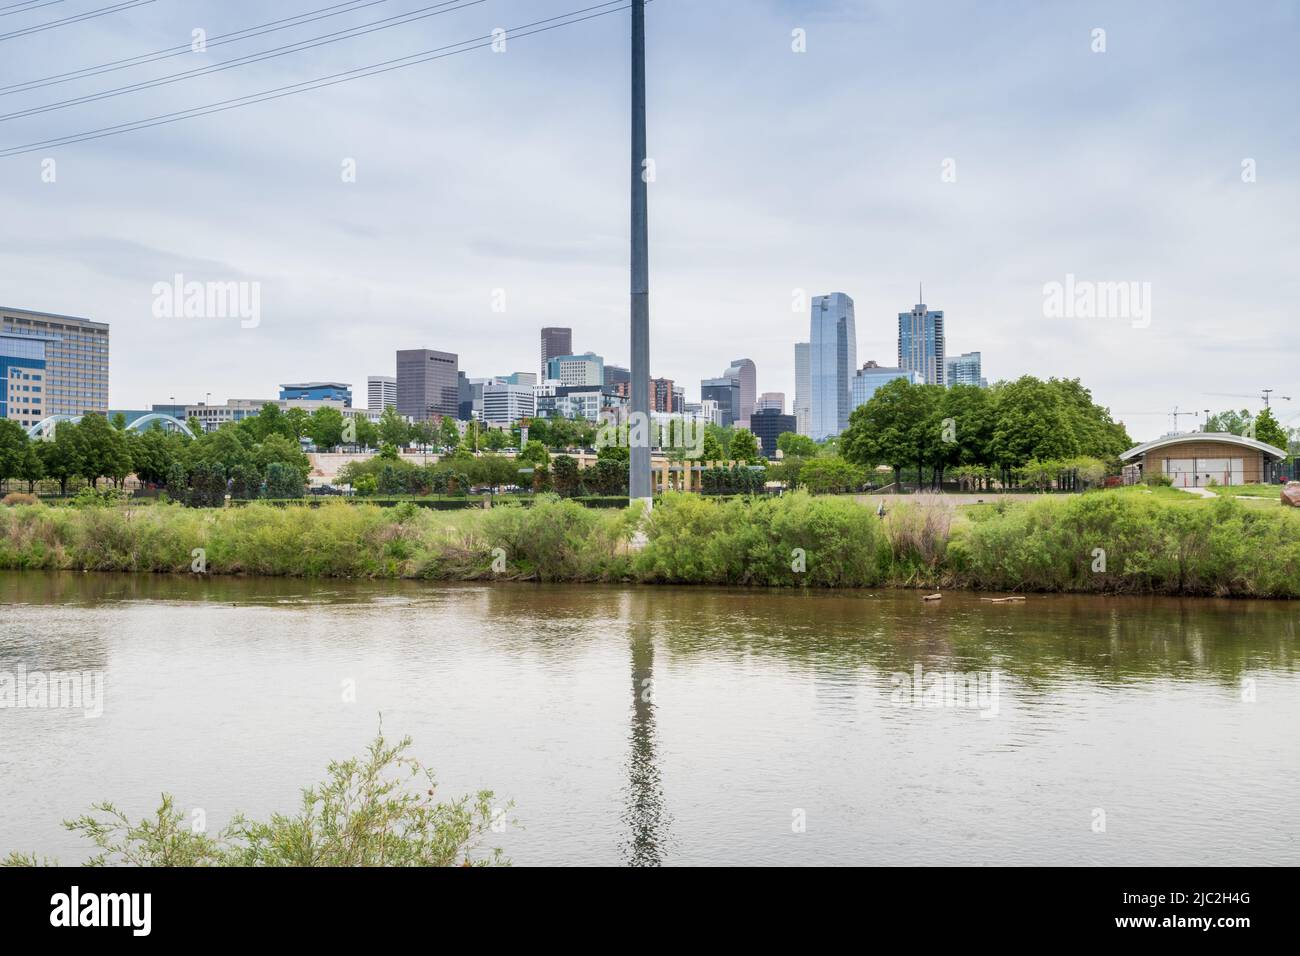 Denver, Colorado, May 28, 2022. Denver downtown skyline viewed from the South Platter River trail near the Aquarium, divided up by a power line pole Stock Photo